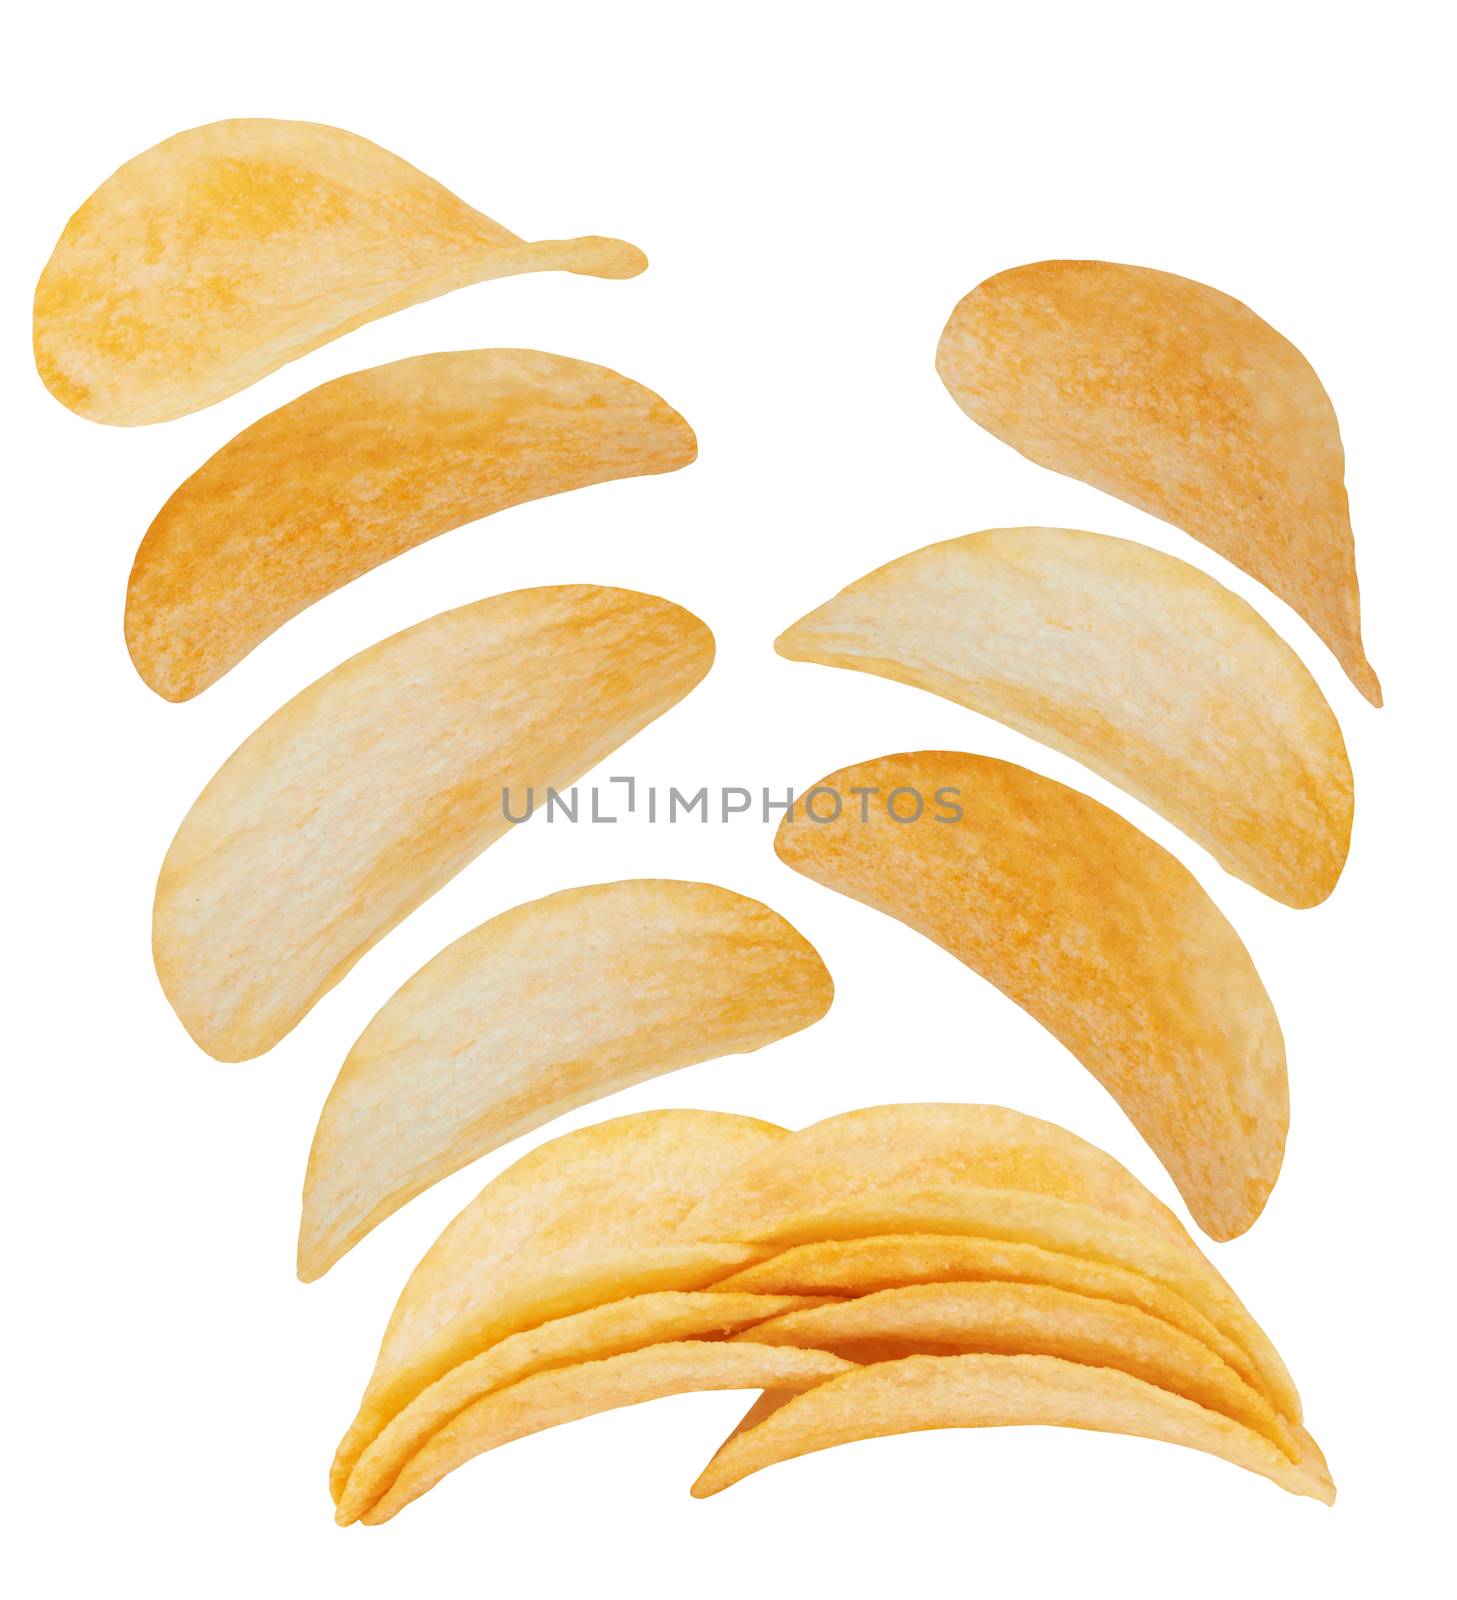 Potato chips by pioneer111